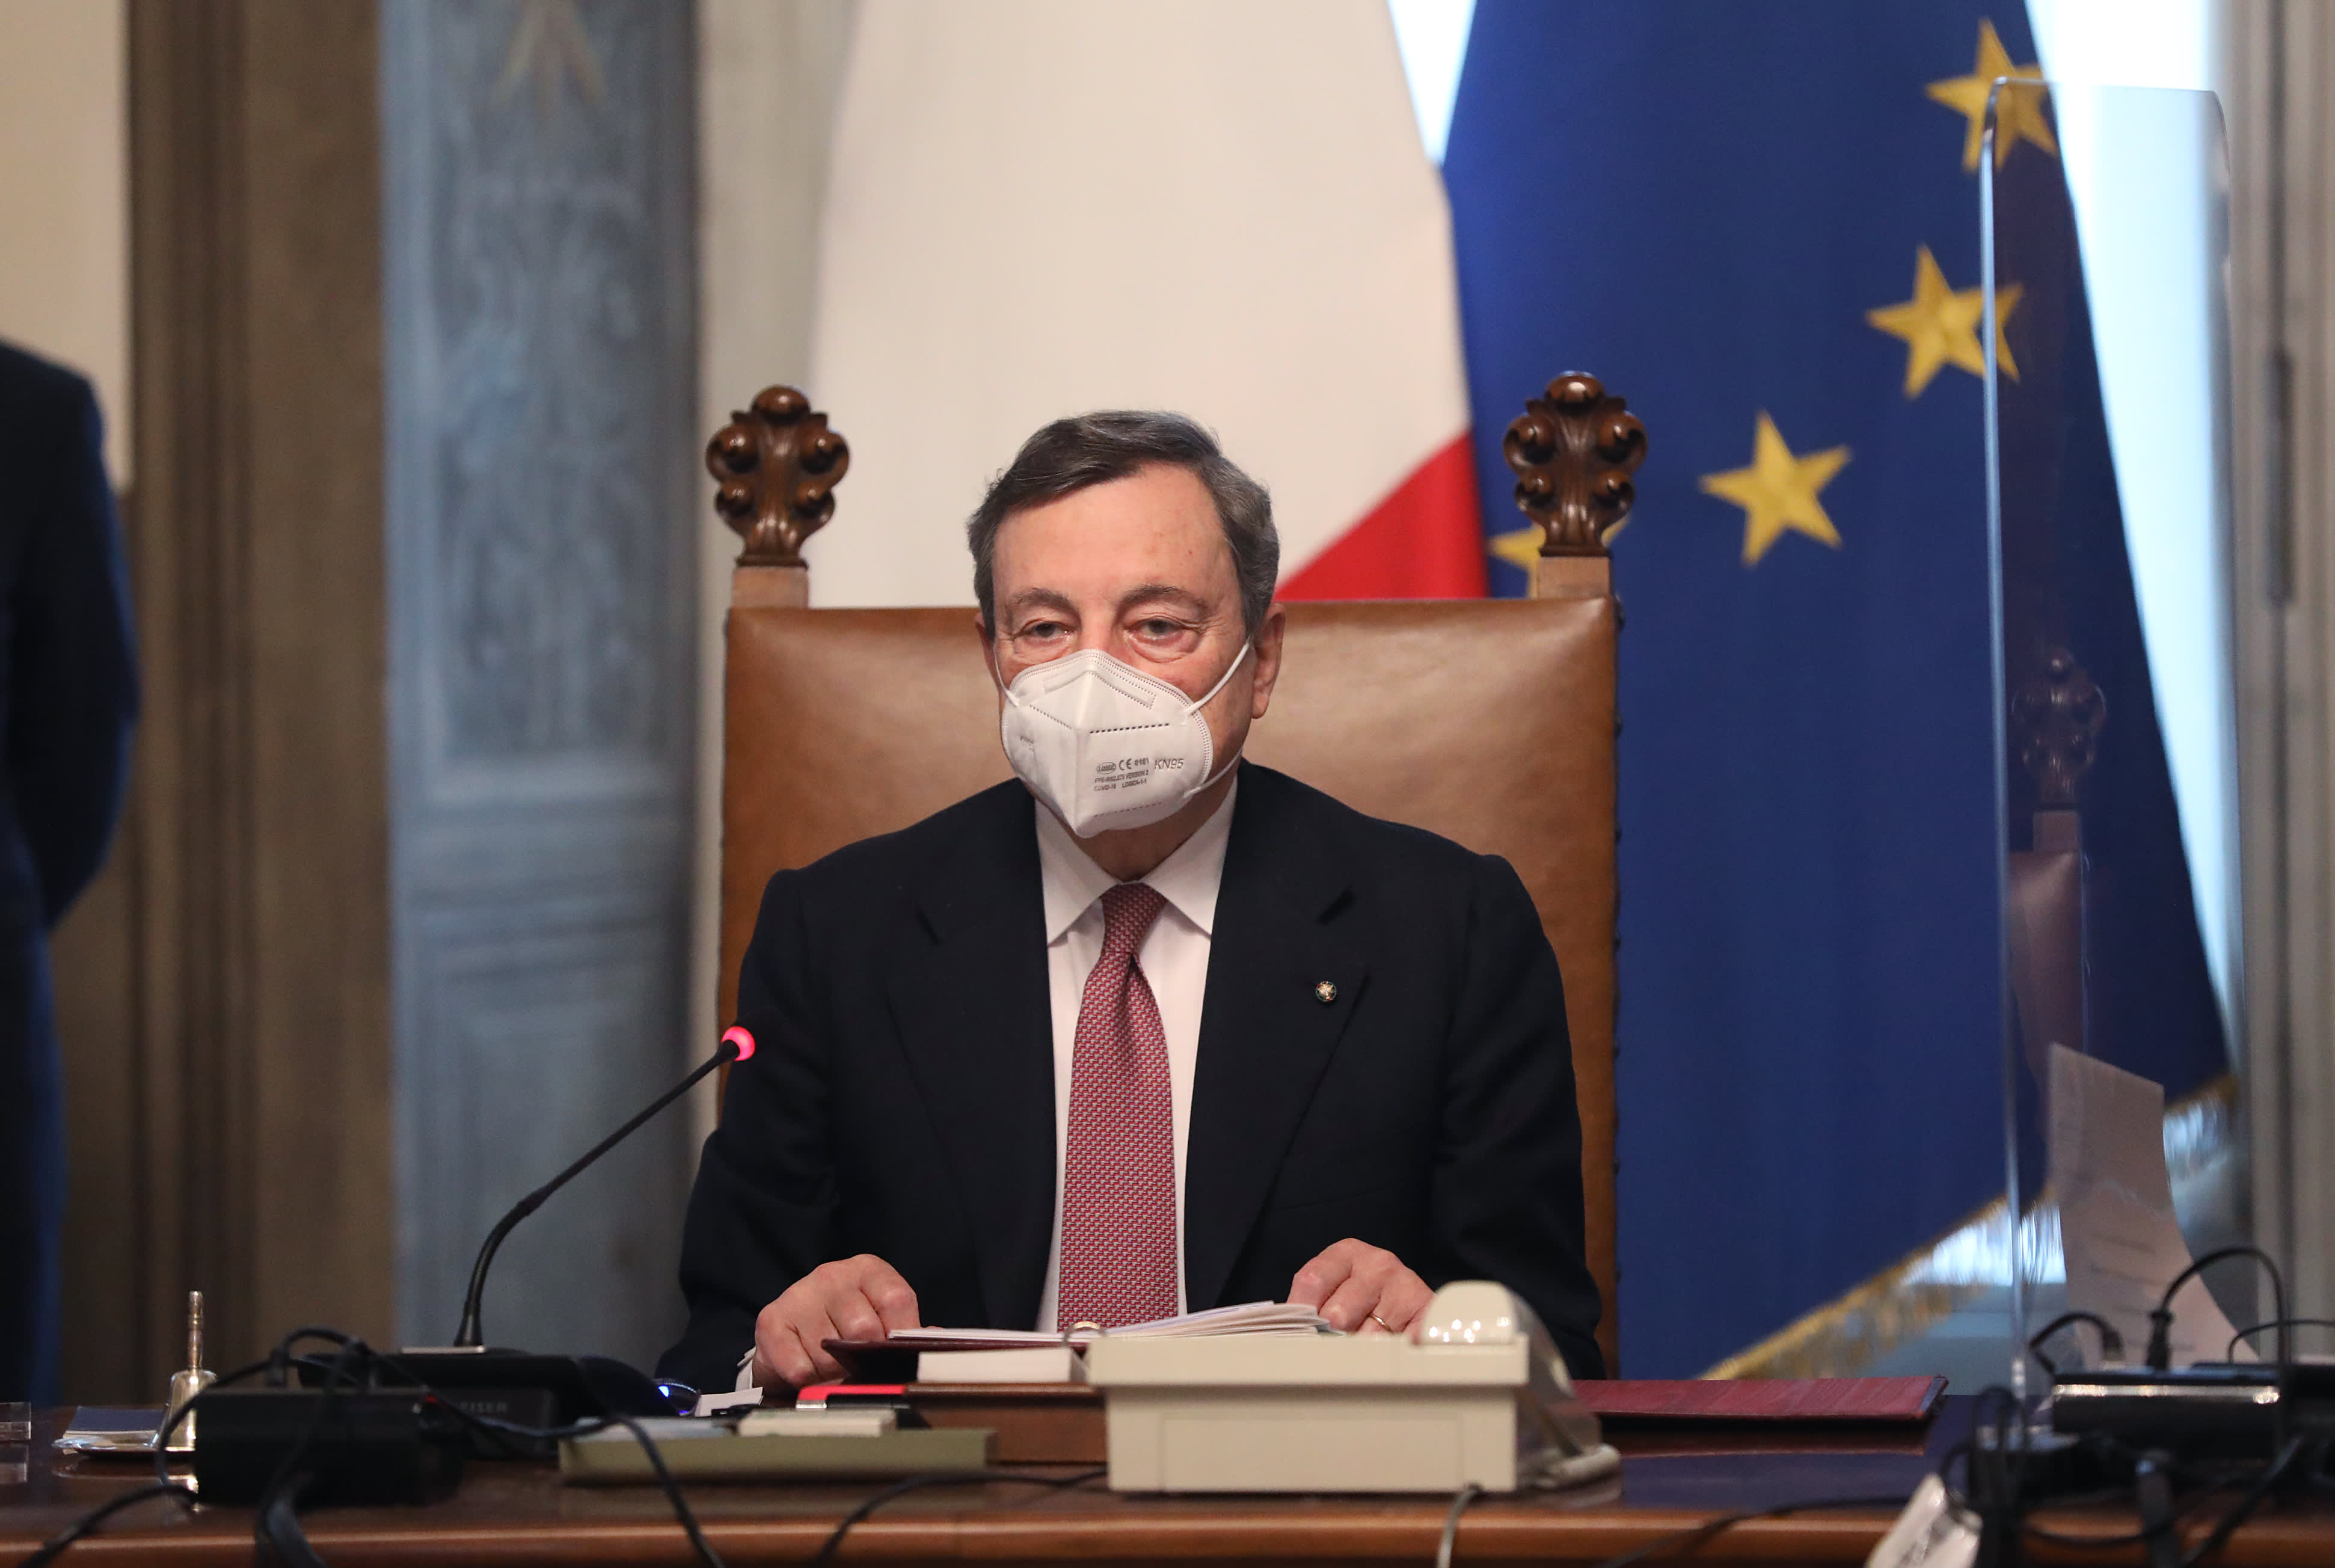 Mario Draghi presents Italy’s new cabinet after the EU funds revolt